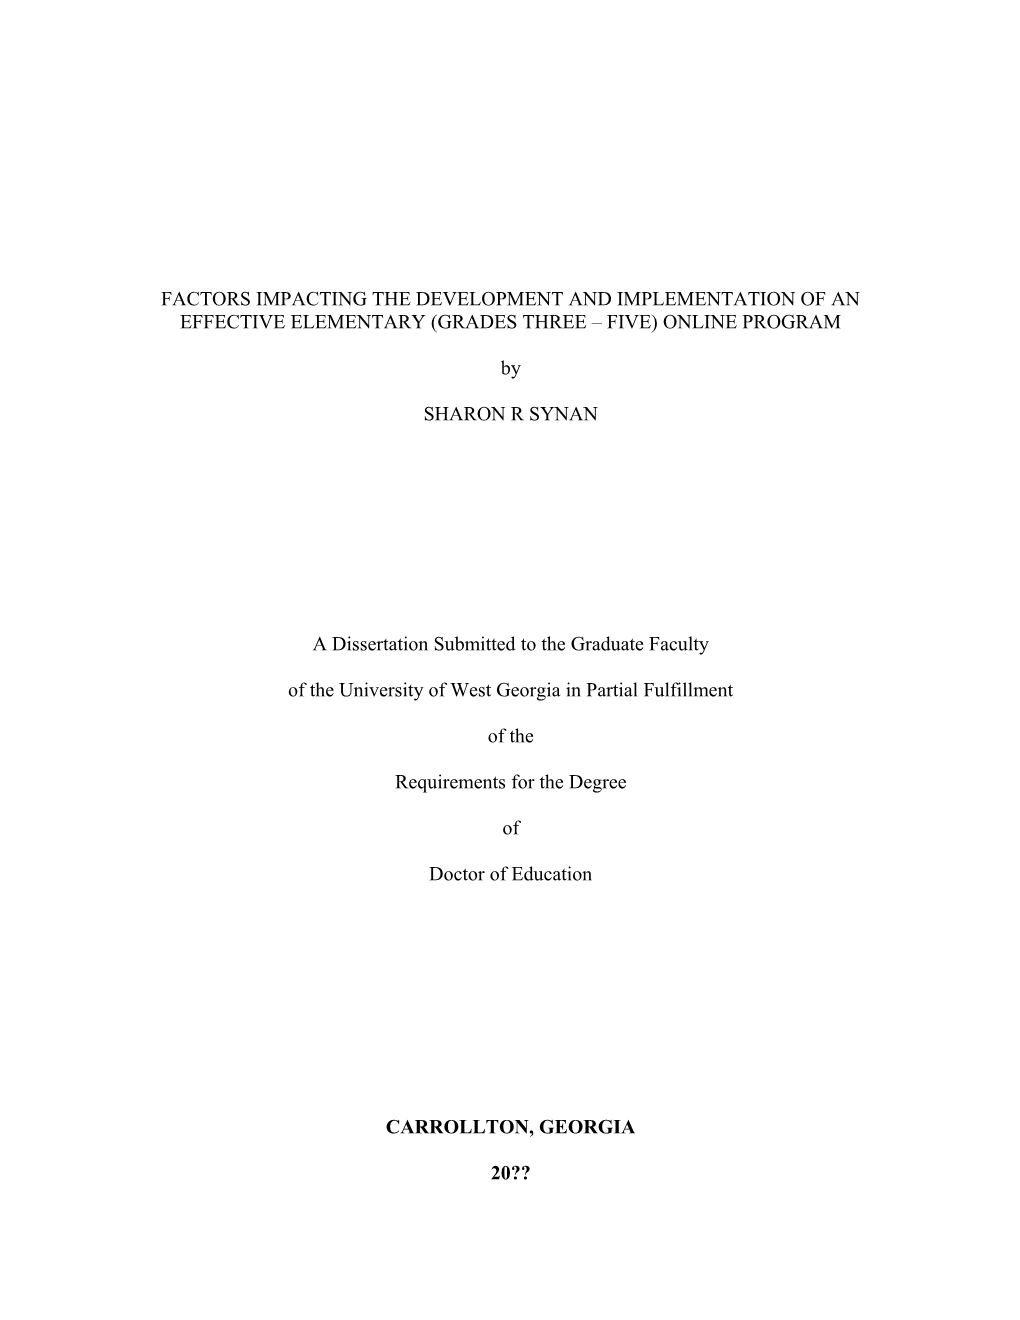 A Dissertation Submitted to the Graduate Faculty